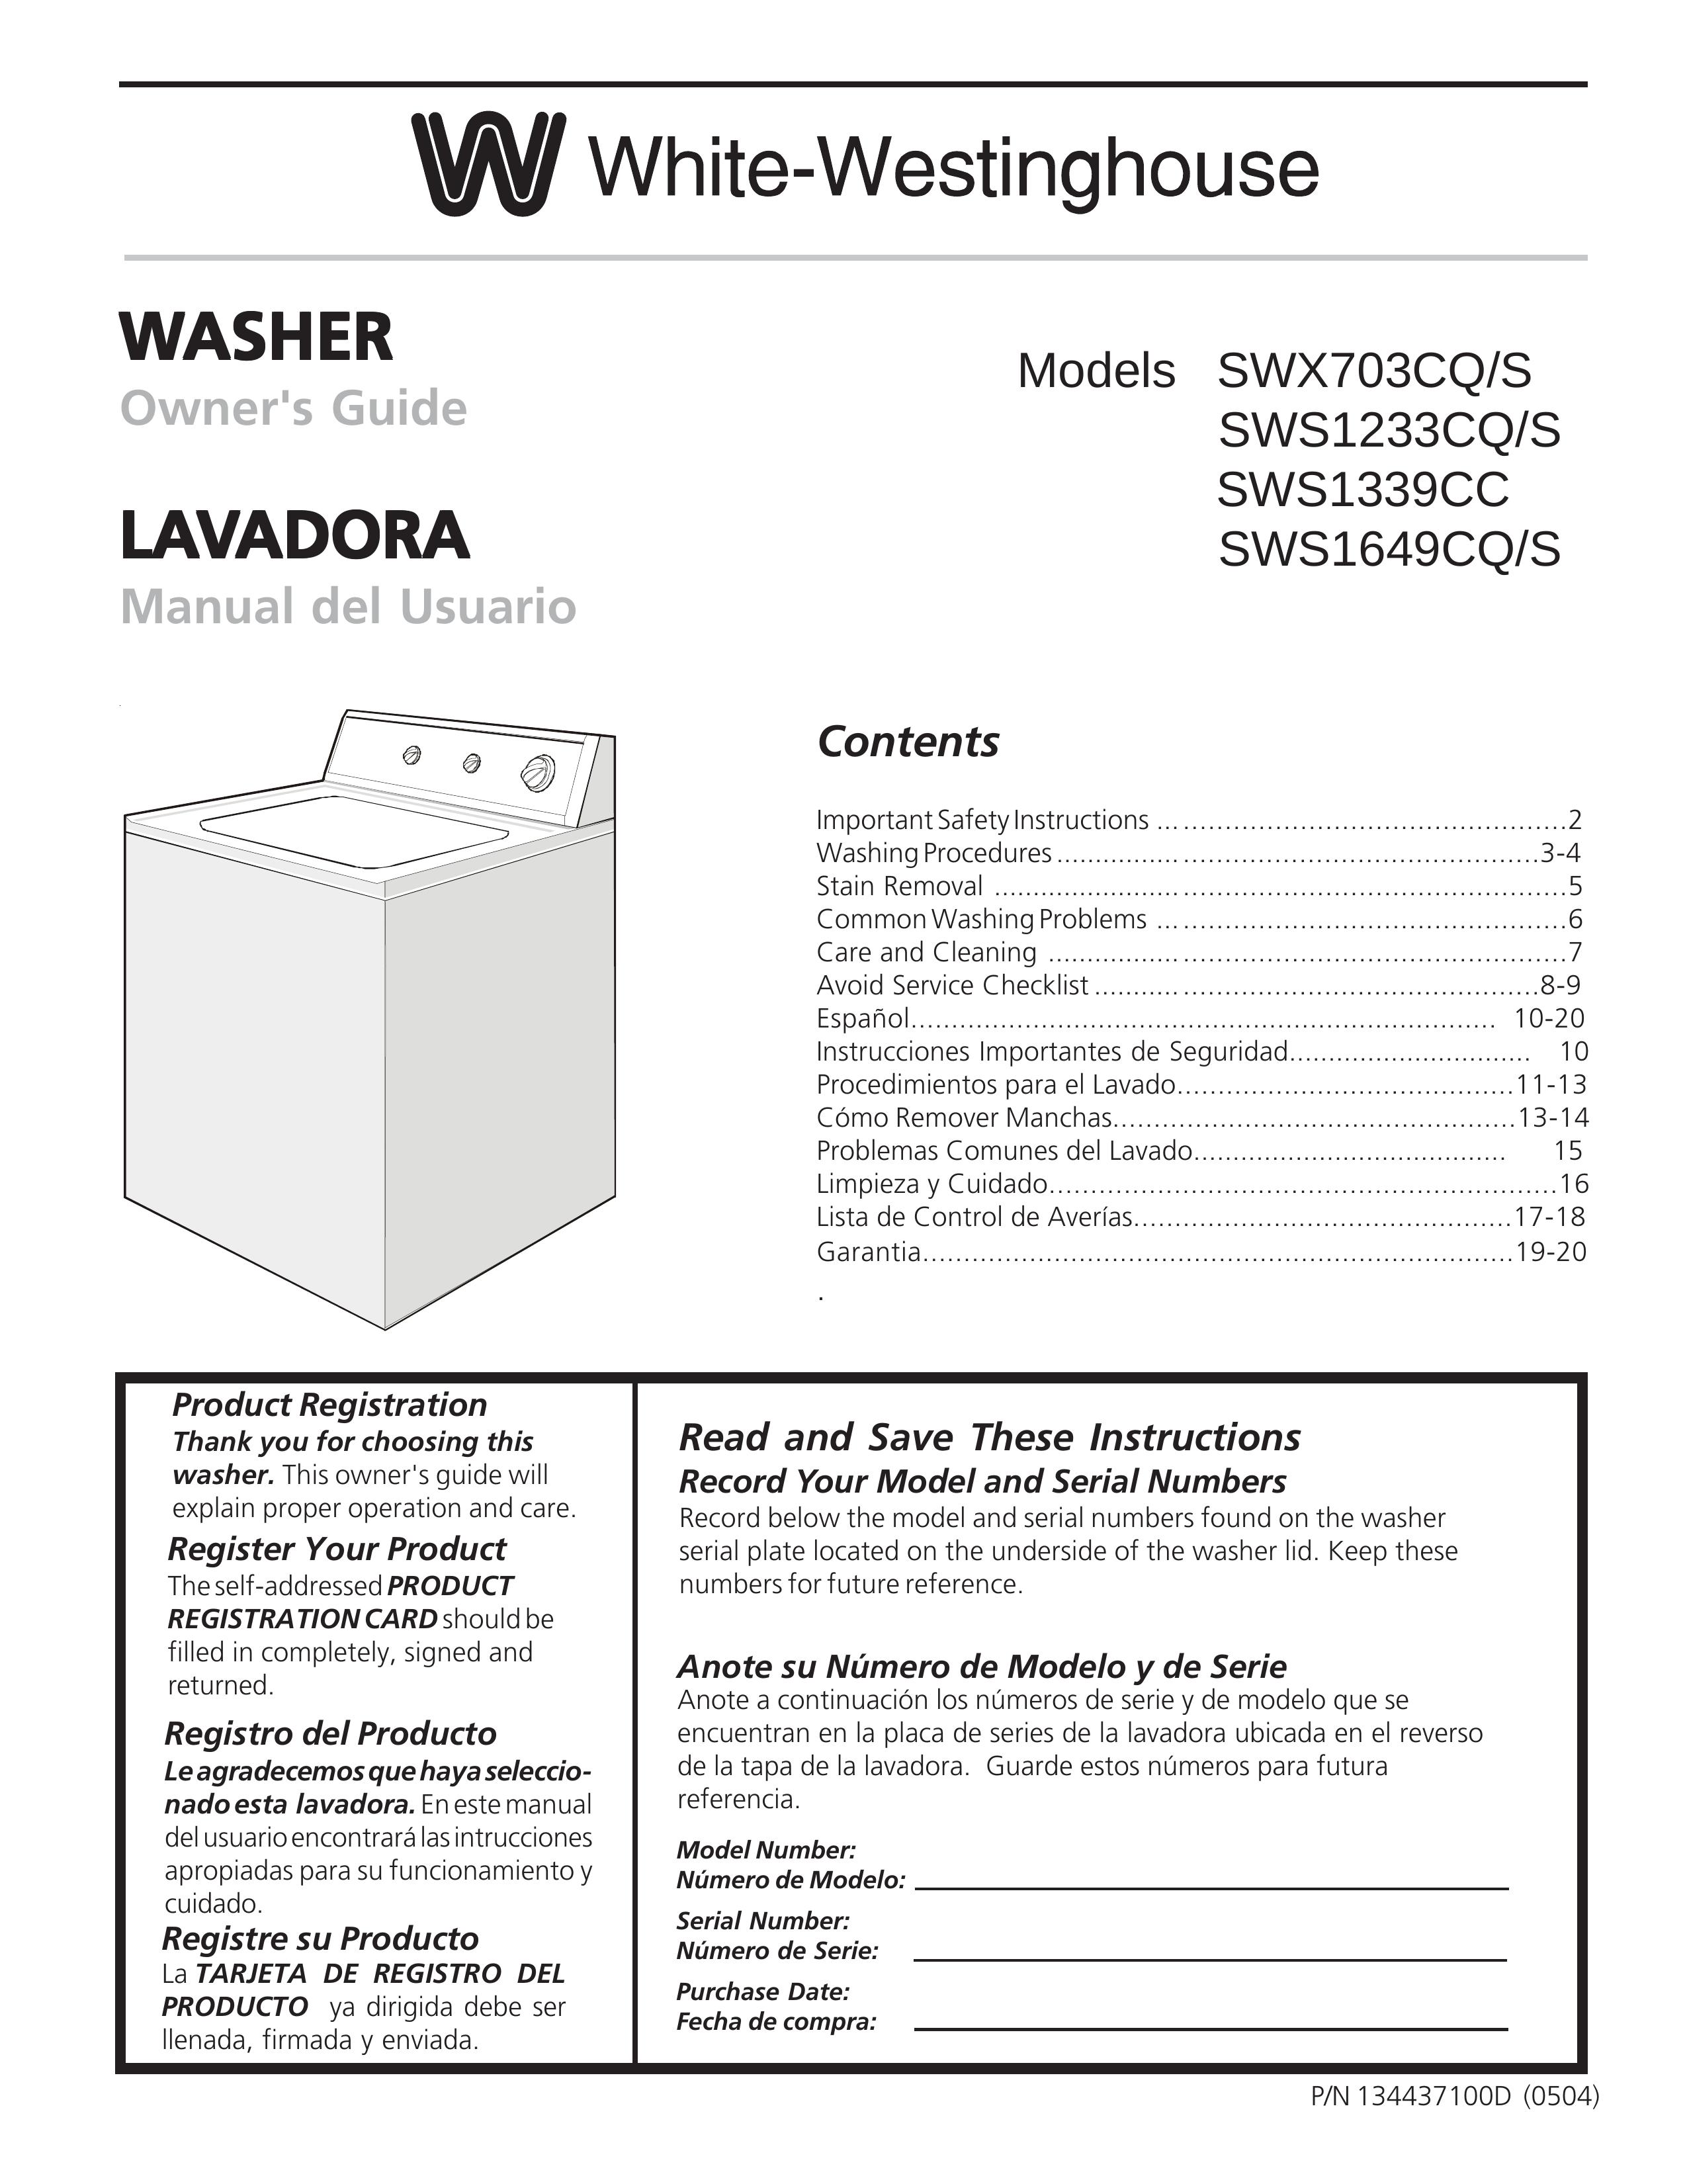 White-Westinghouse SWS1649CQ/S Washer User Manual